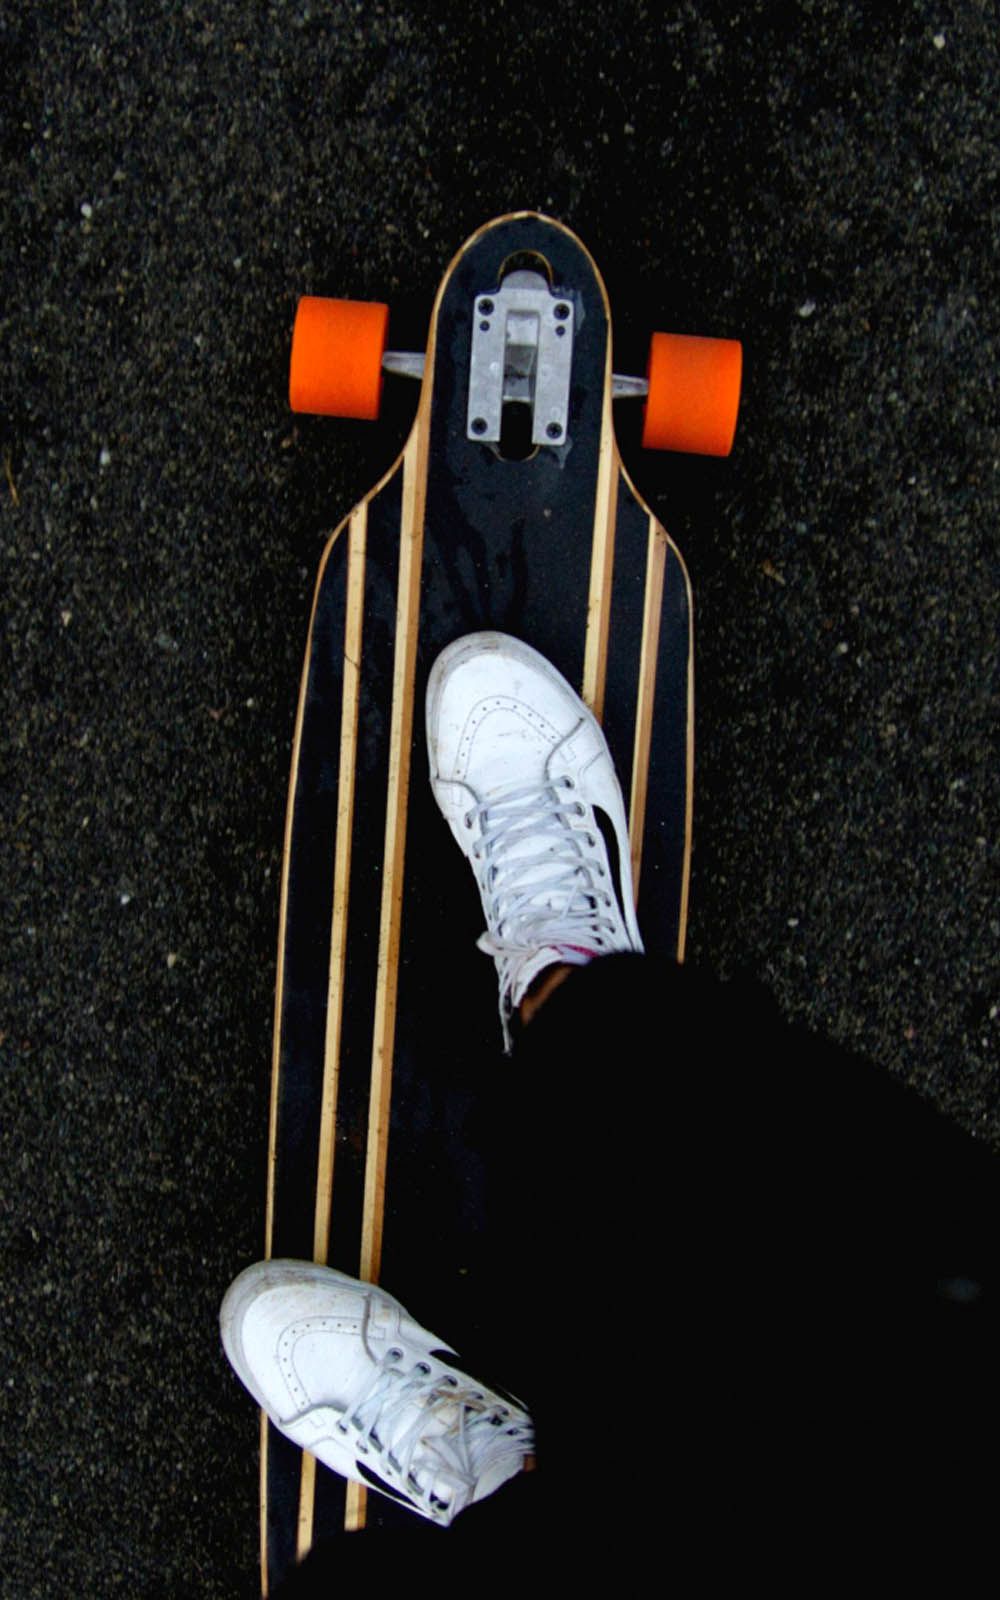 A person's feet are seen resting on a skateboard. - Skate, skater